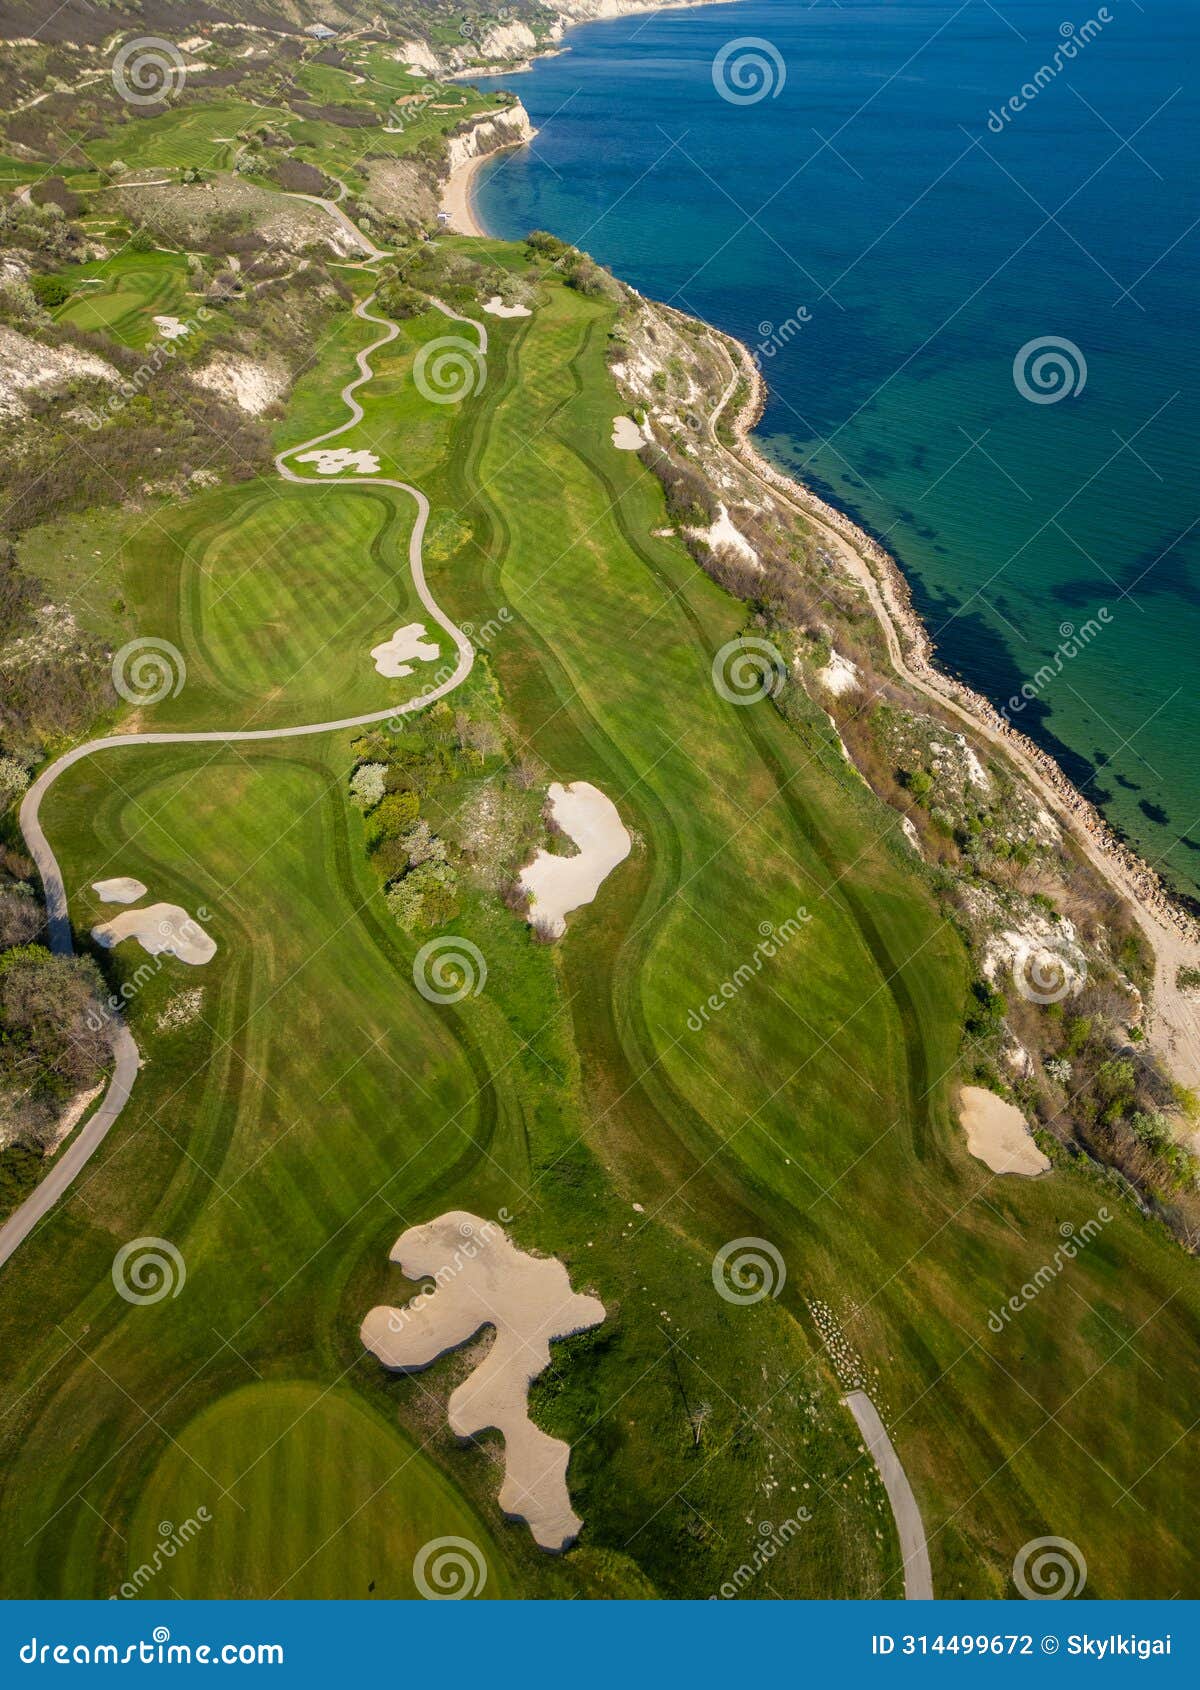 aerial view of golf course by the sea